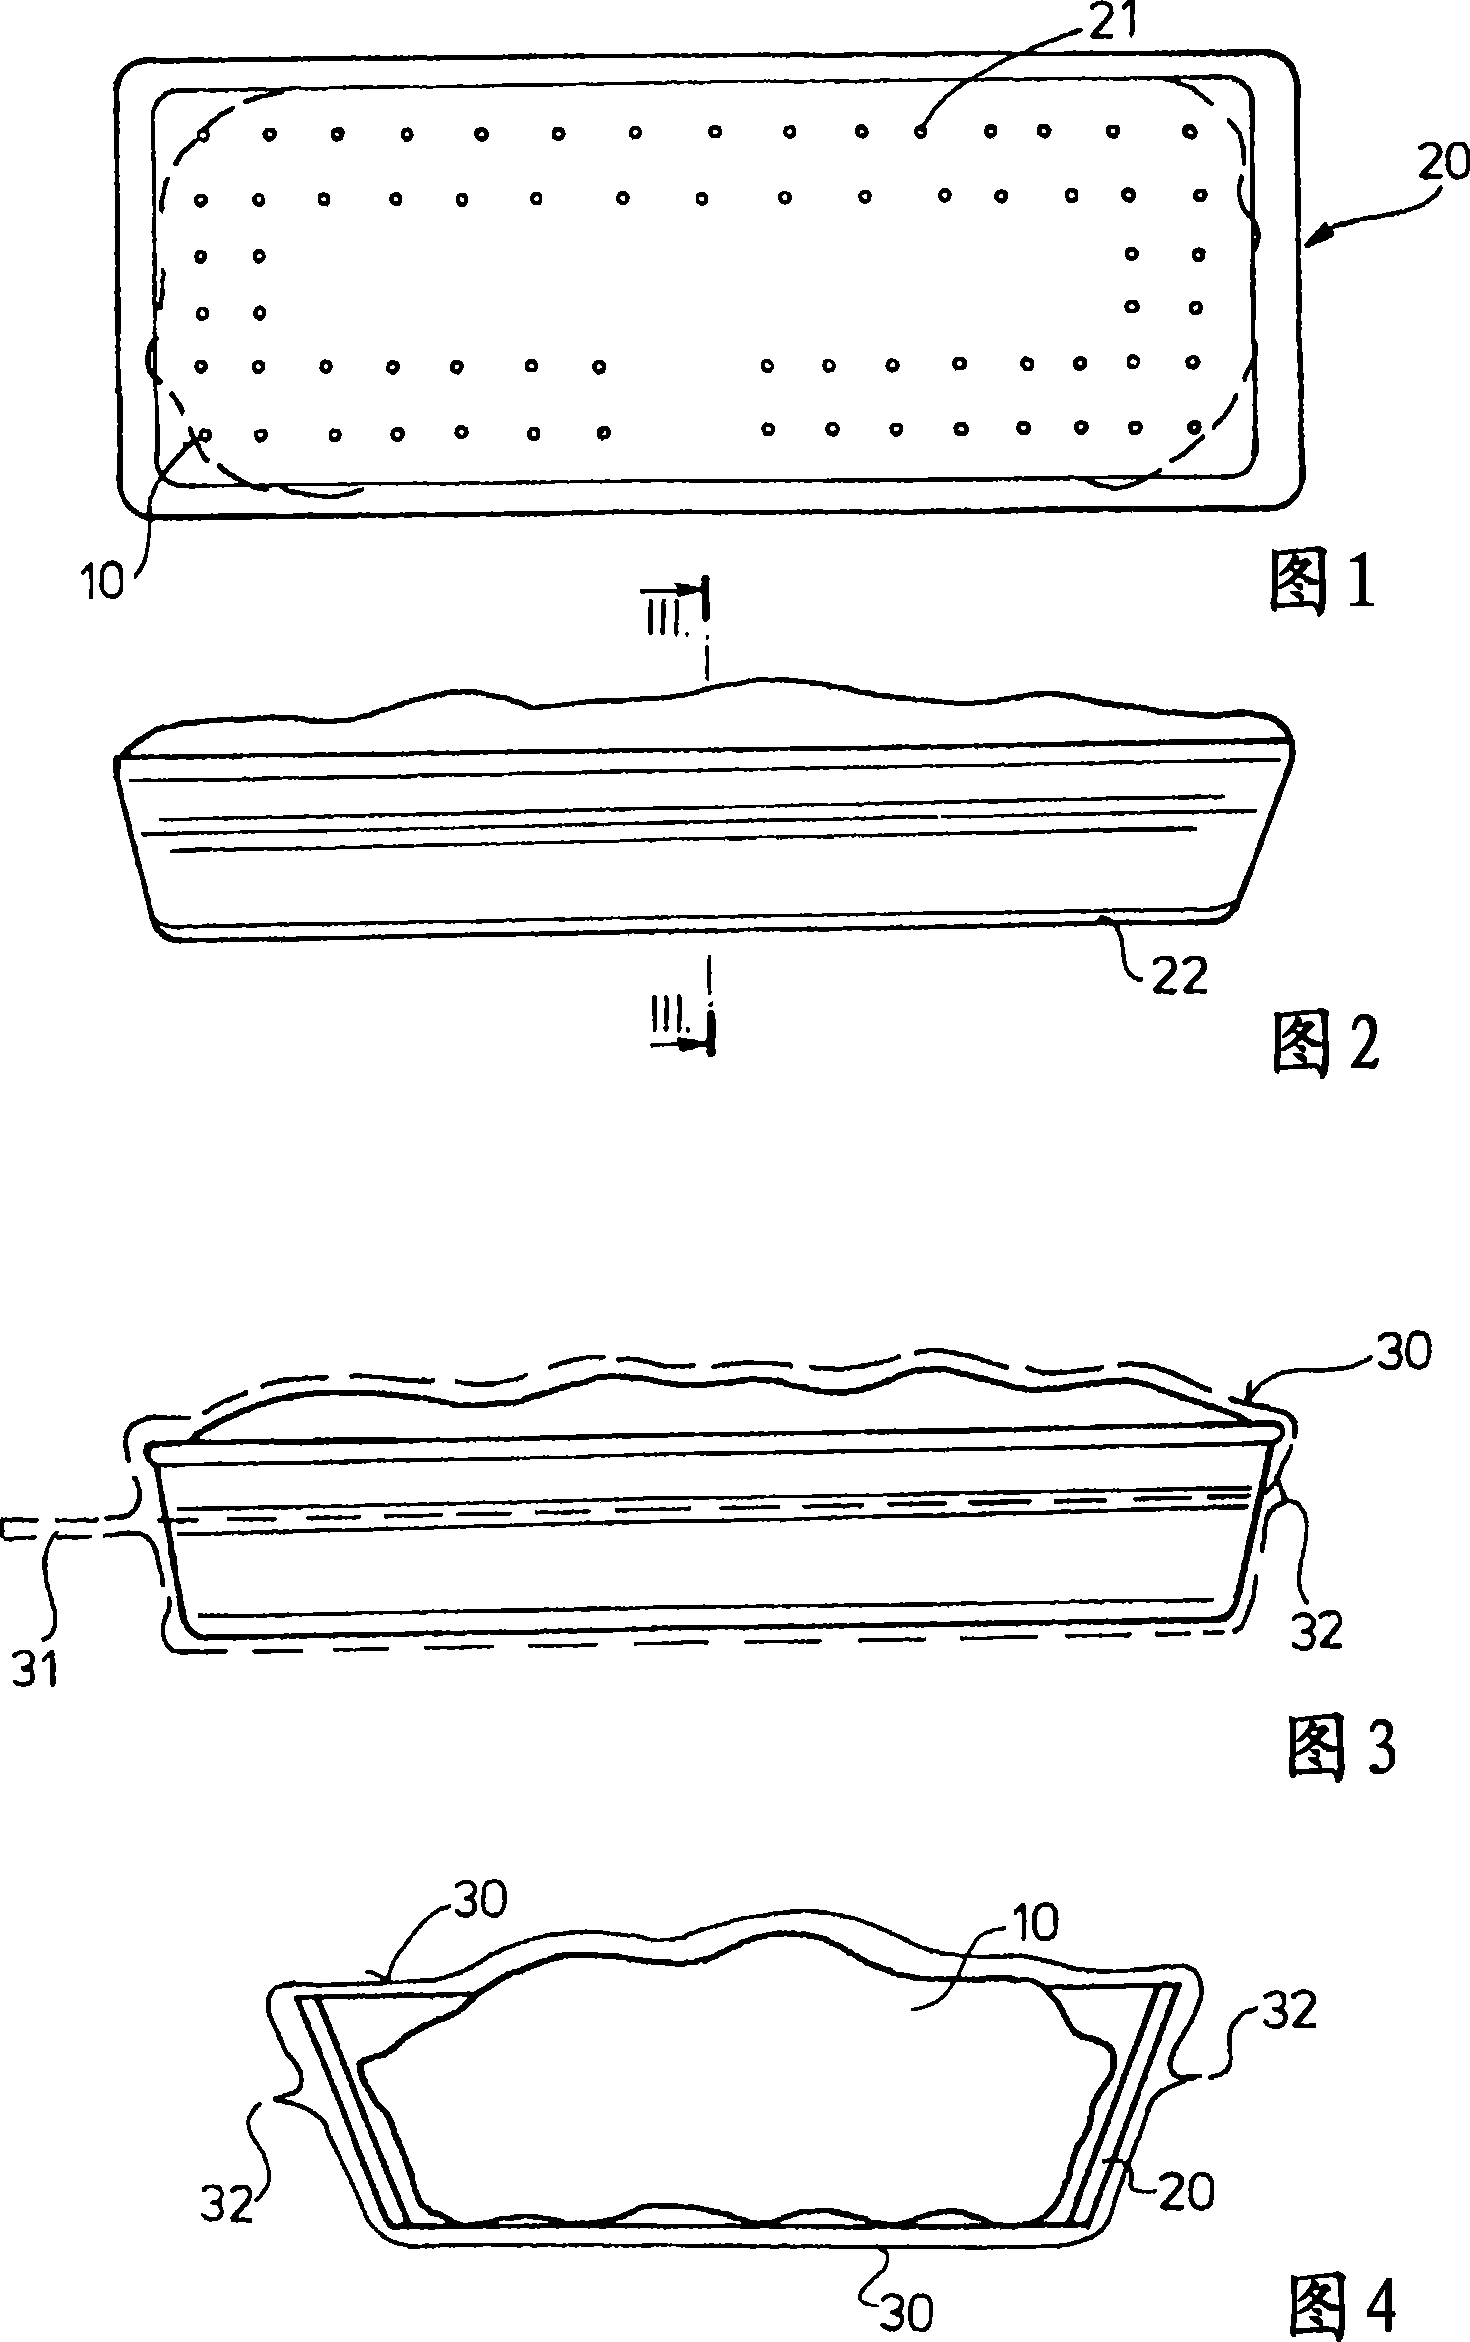 Packaged fresh food product and method for packaging fresh food products